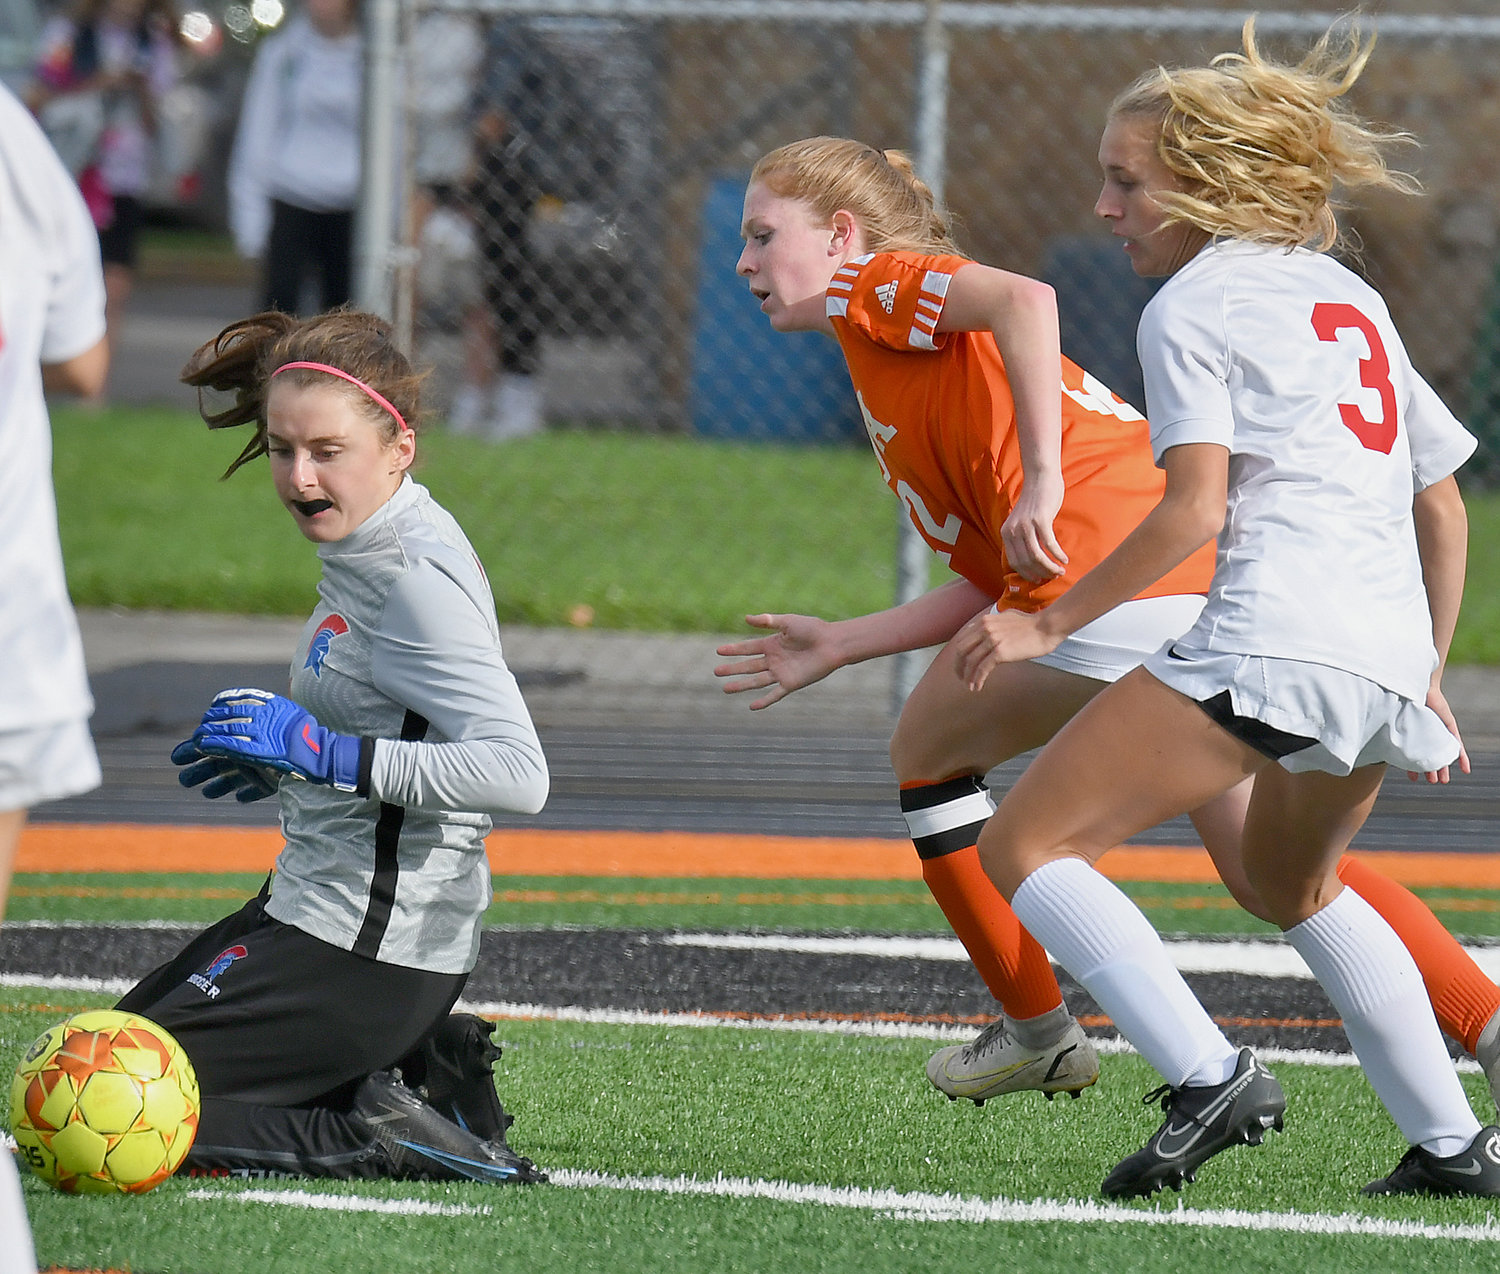 New Hartford goalie Savannah Cole slides to make a save in front of New Hartford teammate Grace Serafin and Rome Free Academy's Brynn Furbeck on Thursday at RFA Stadium. New Hartford won 8-1 to continue a unbeaten streak that is at 46 games.